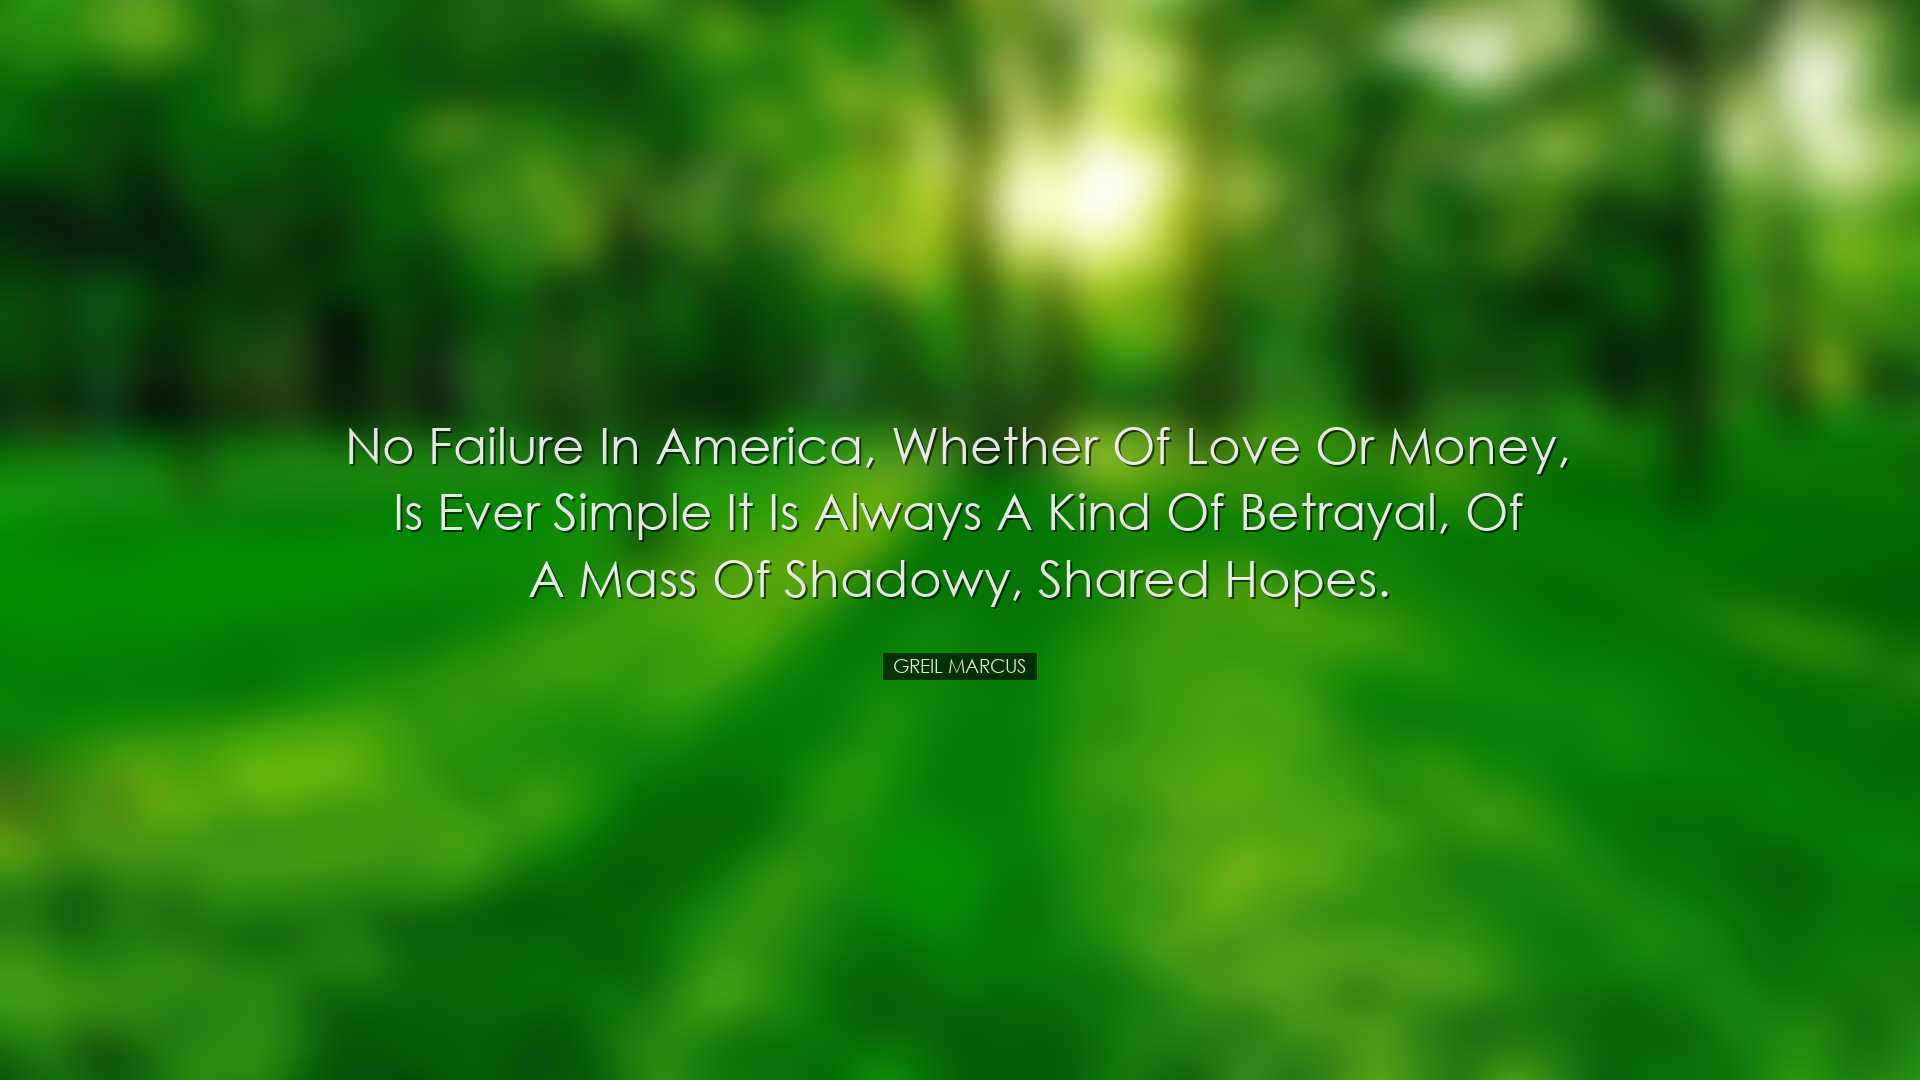 No failure in America, whether of love or money, is ever simple it